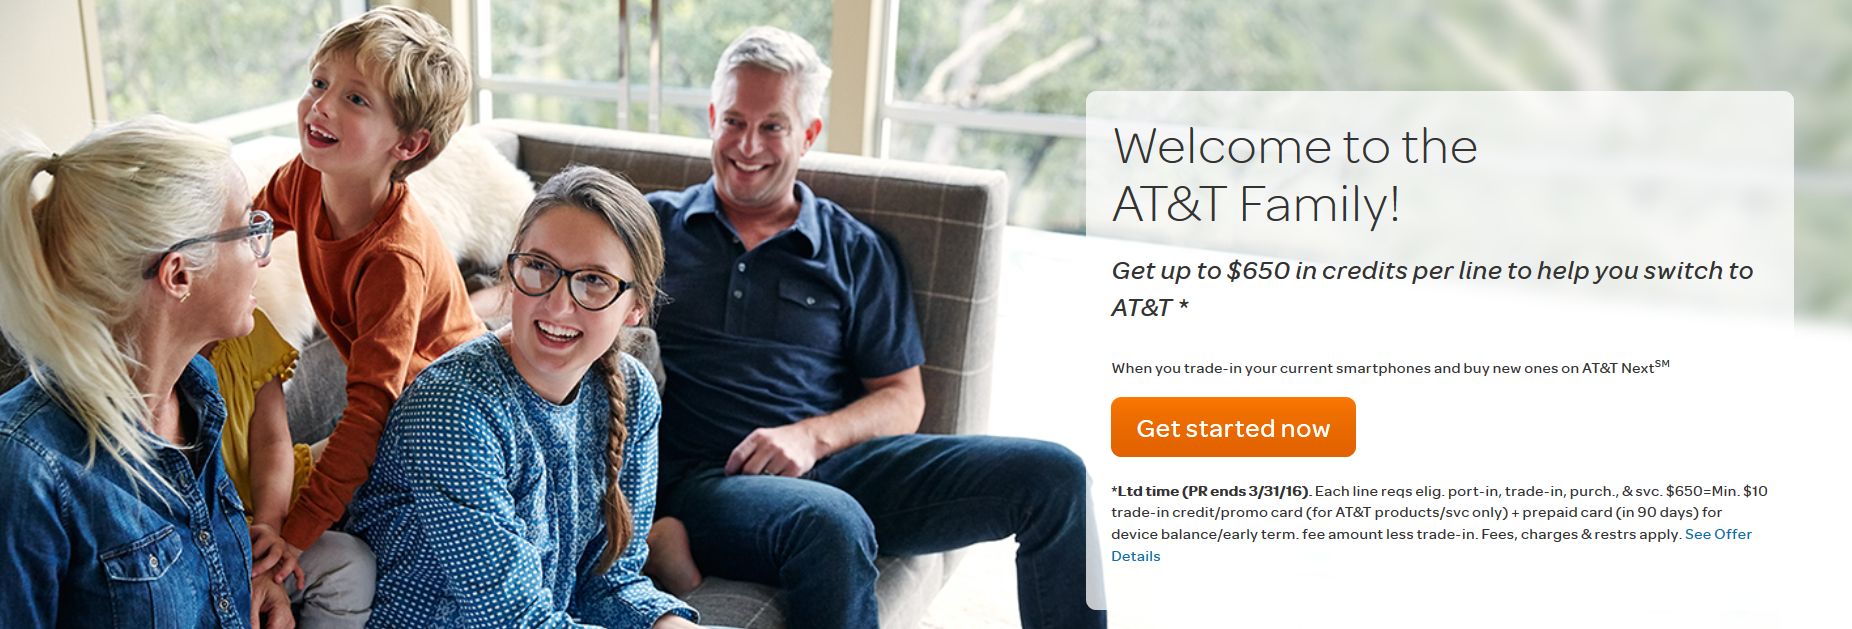 Switch to AT&amp;T and receive up to $650 per line to pay for an ETF or device balance - Starting today, AT&T will pay your ETF or device balance costs up to $650 per line when you switch